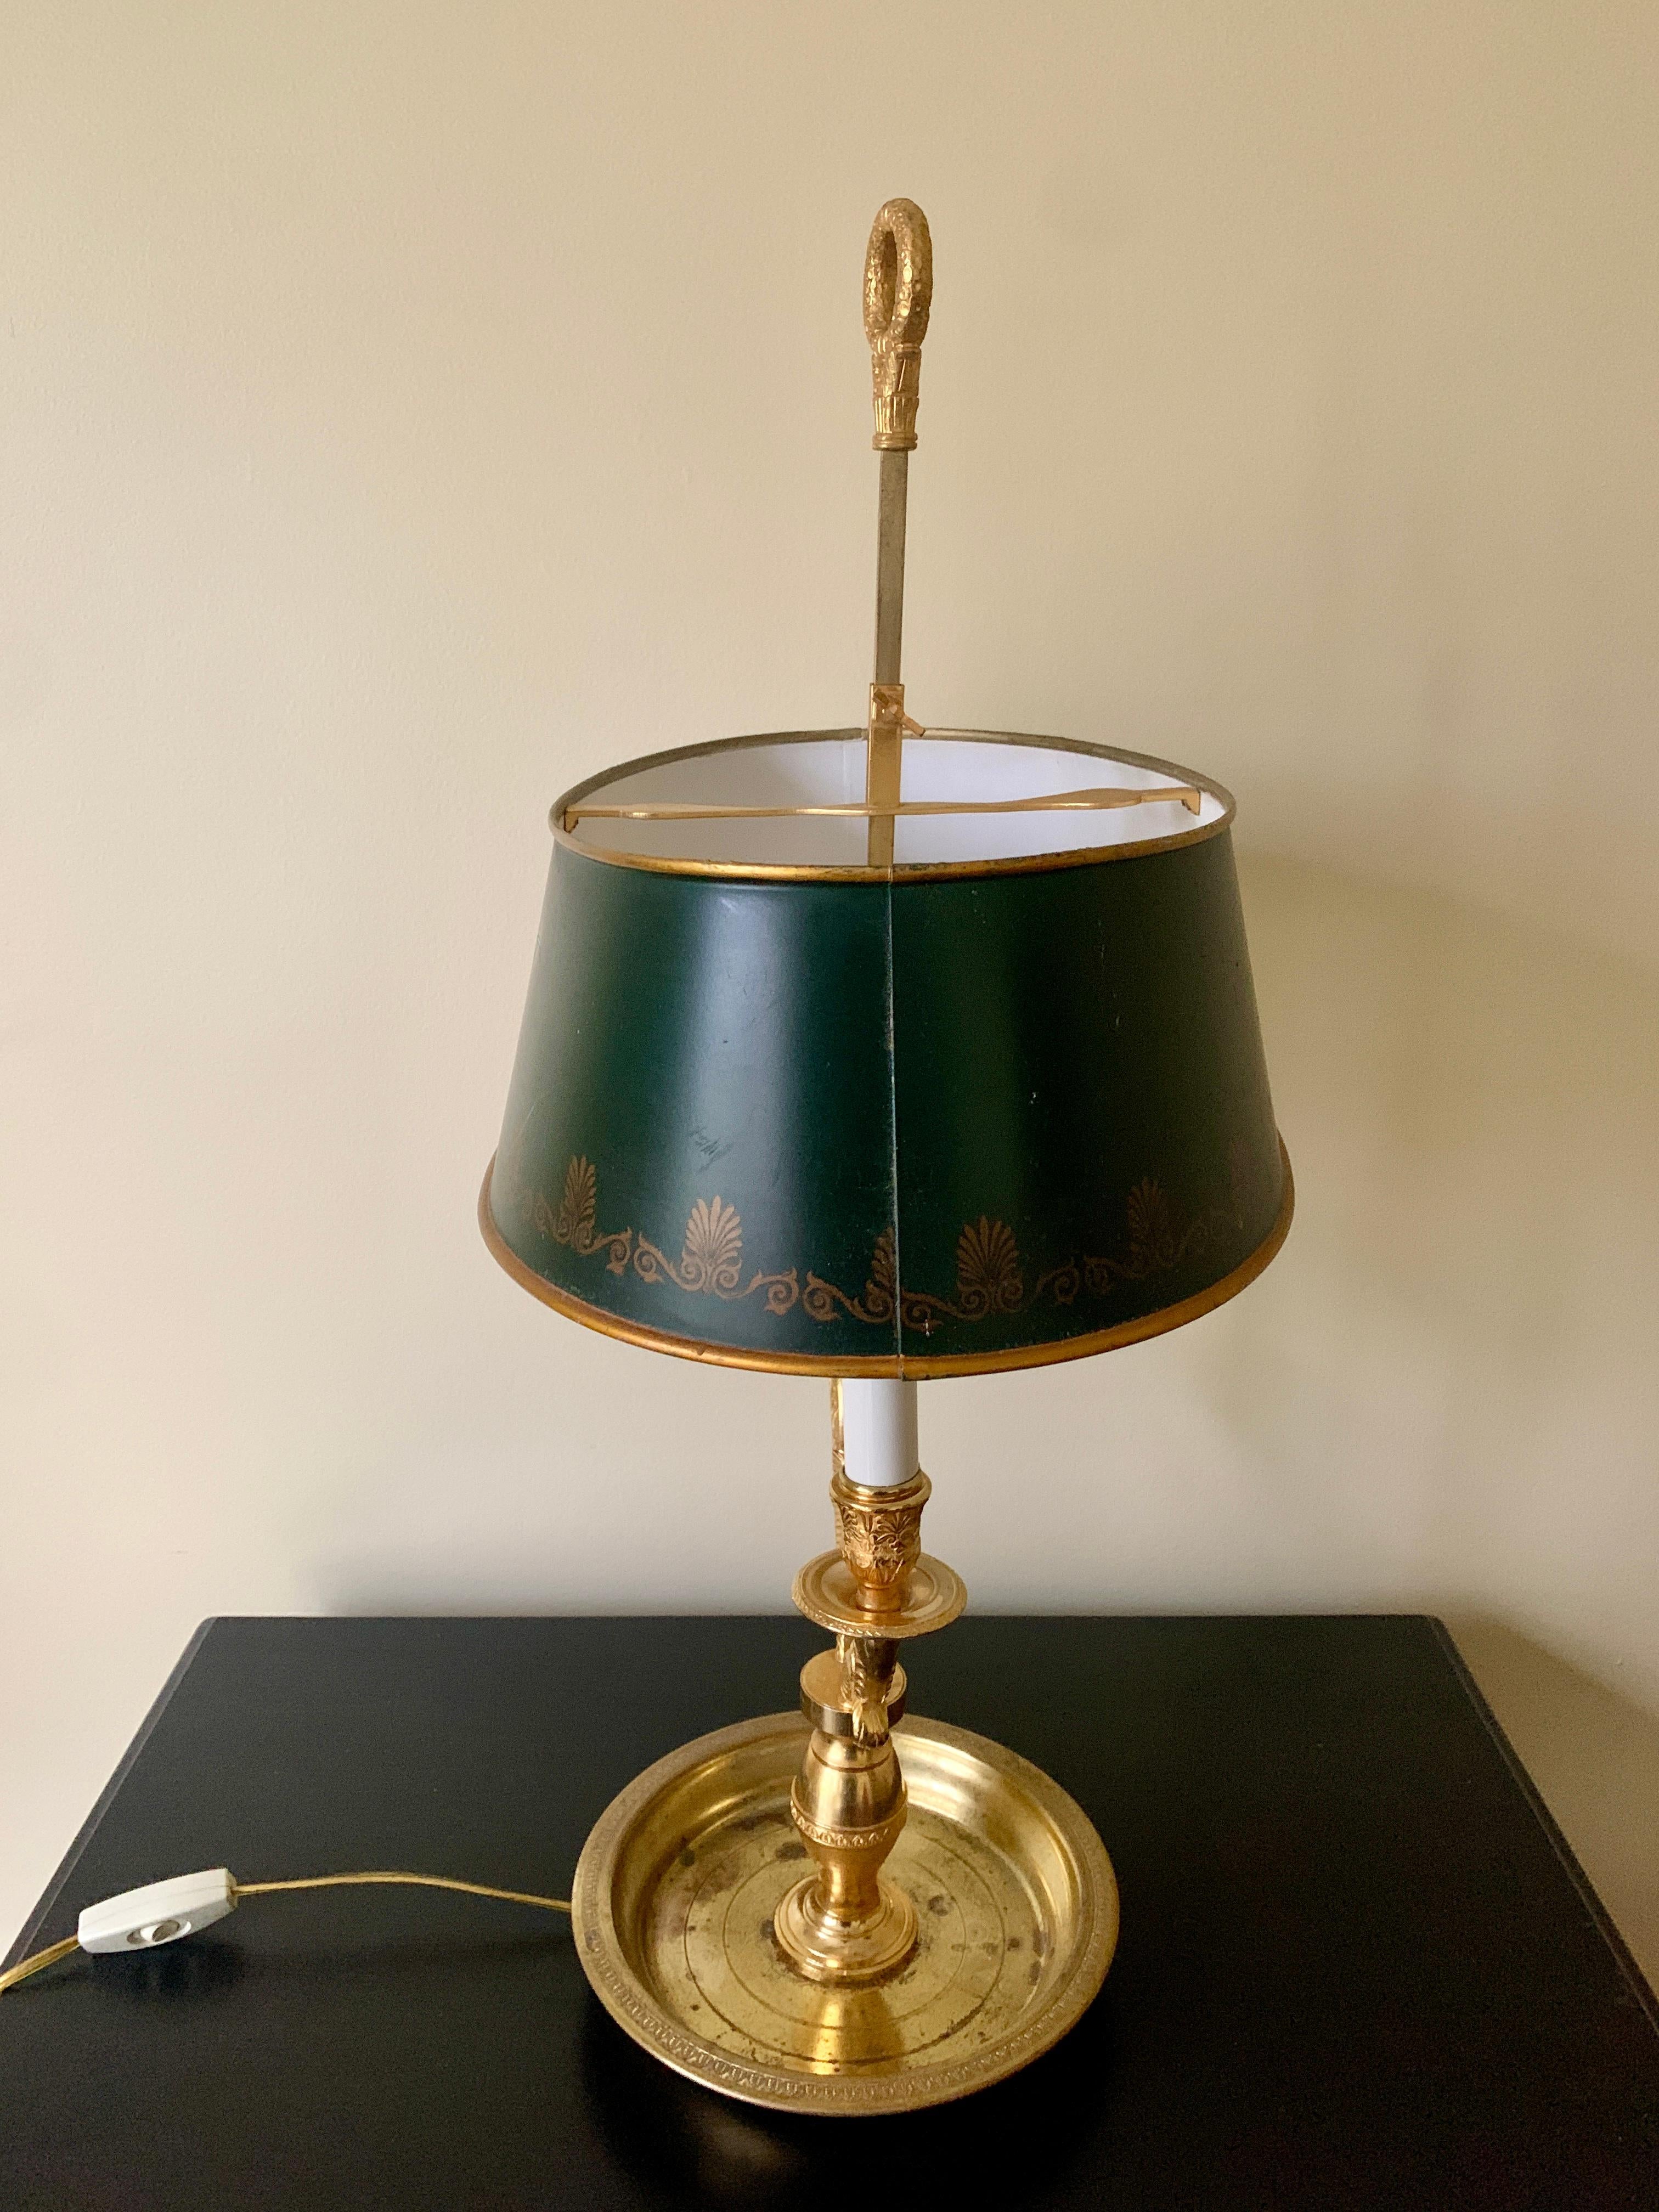 French Provincial Brass Bouillotte Lamp With Stenciled Green Tole Shade For Sale 5